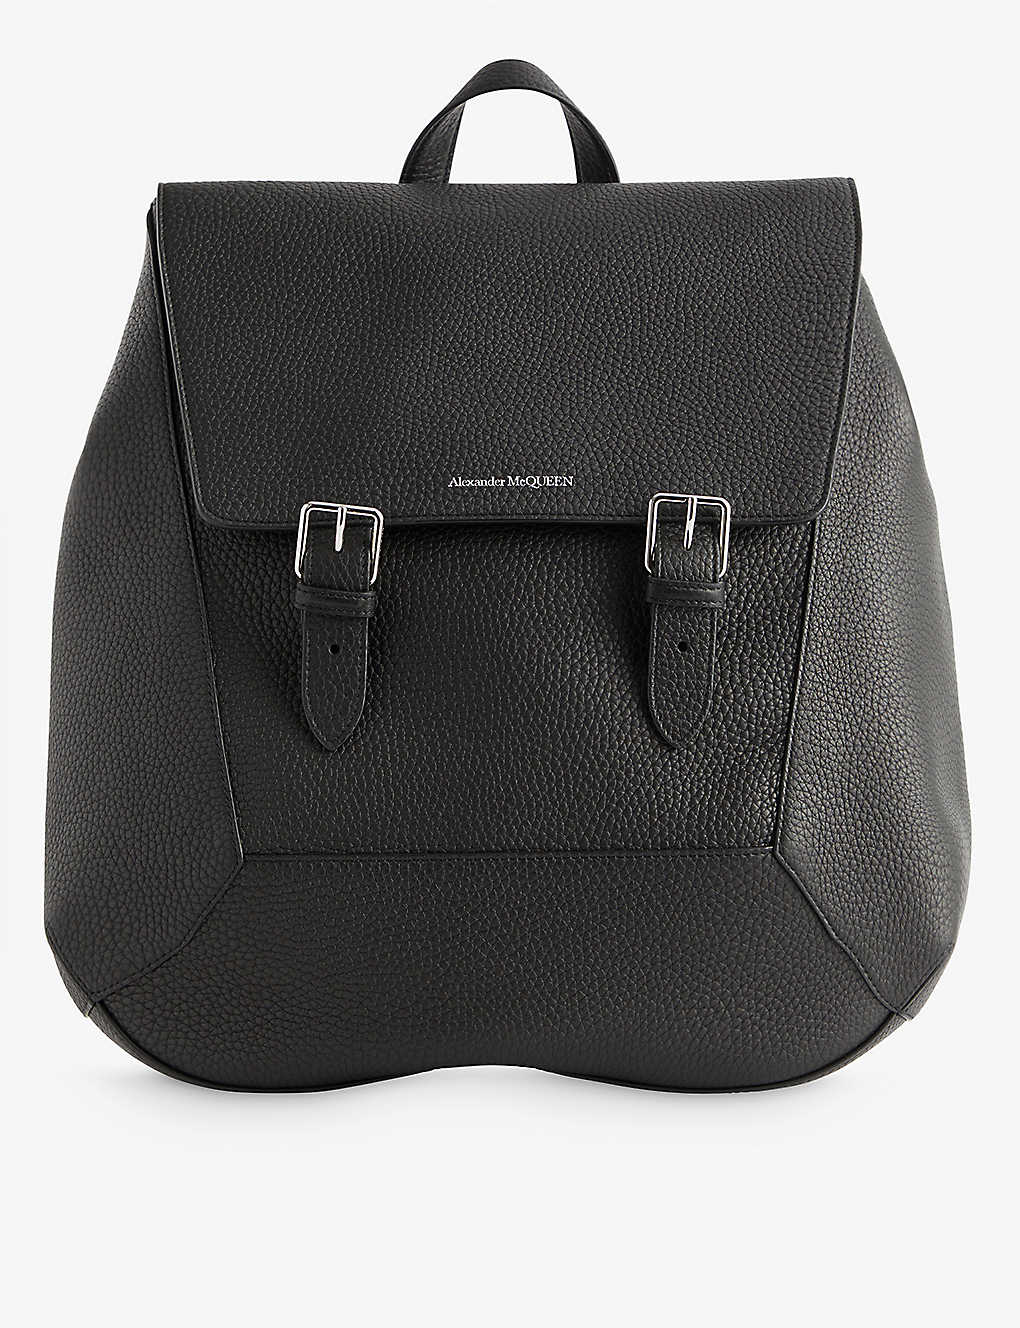 Alexander Mcqueen Mens Black The Edge Leather Backpack